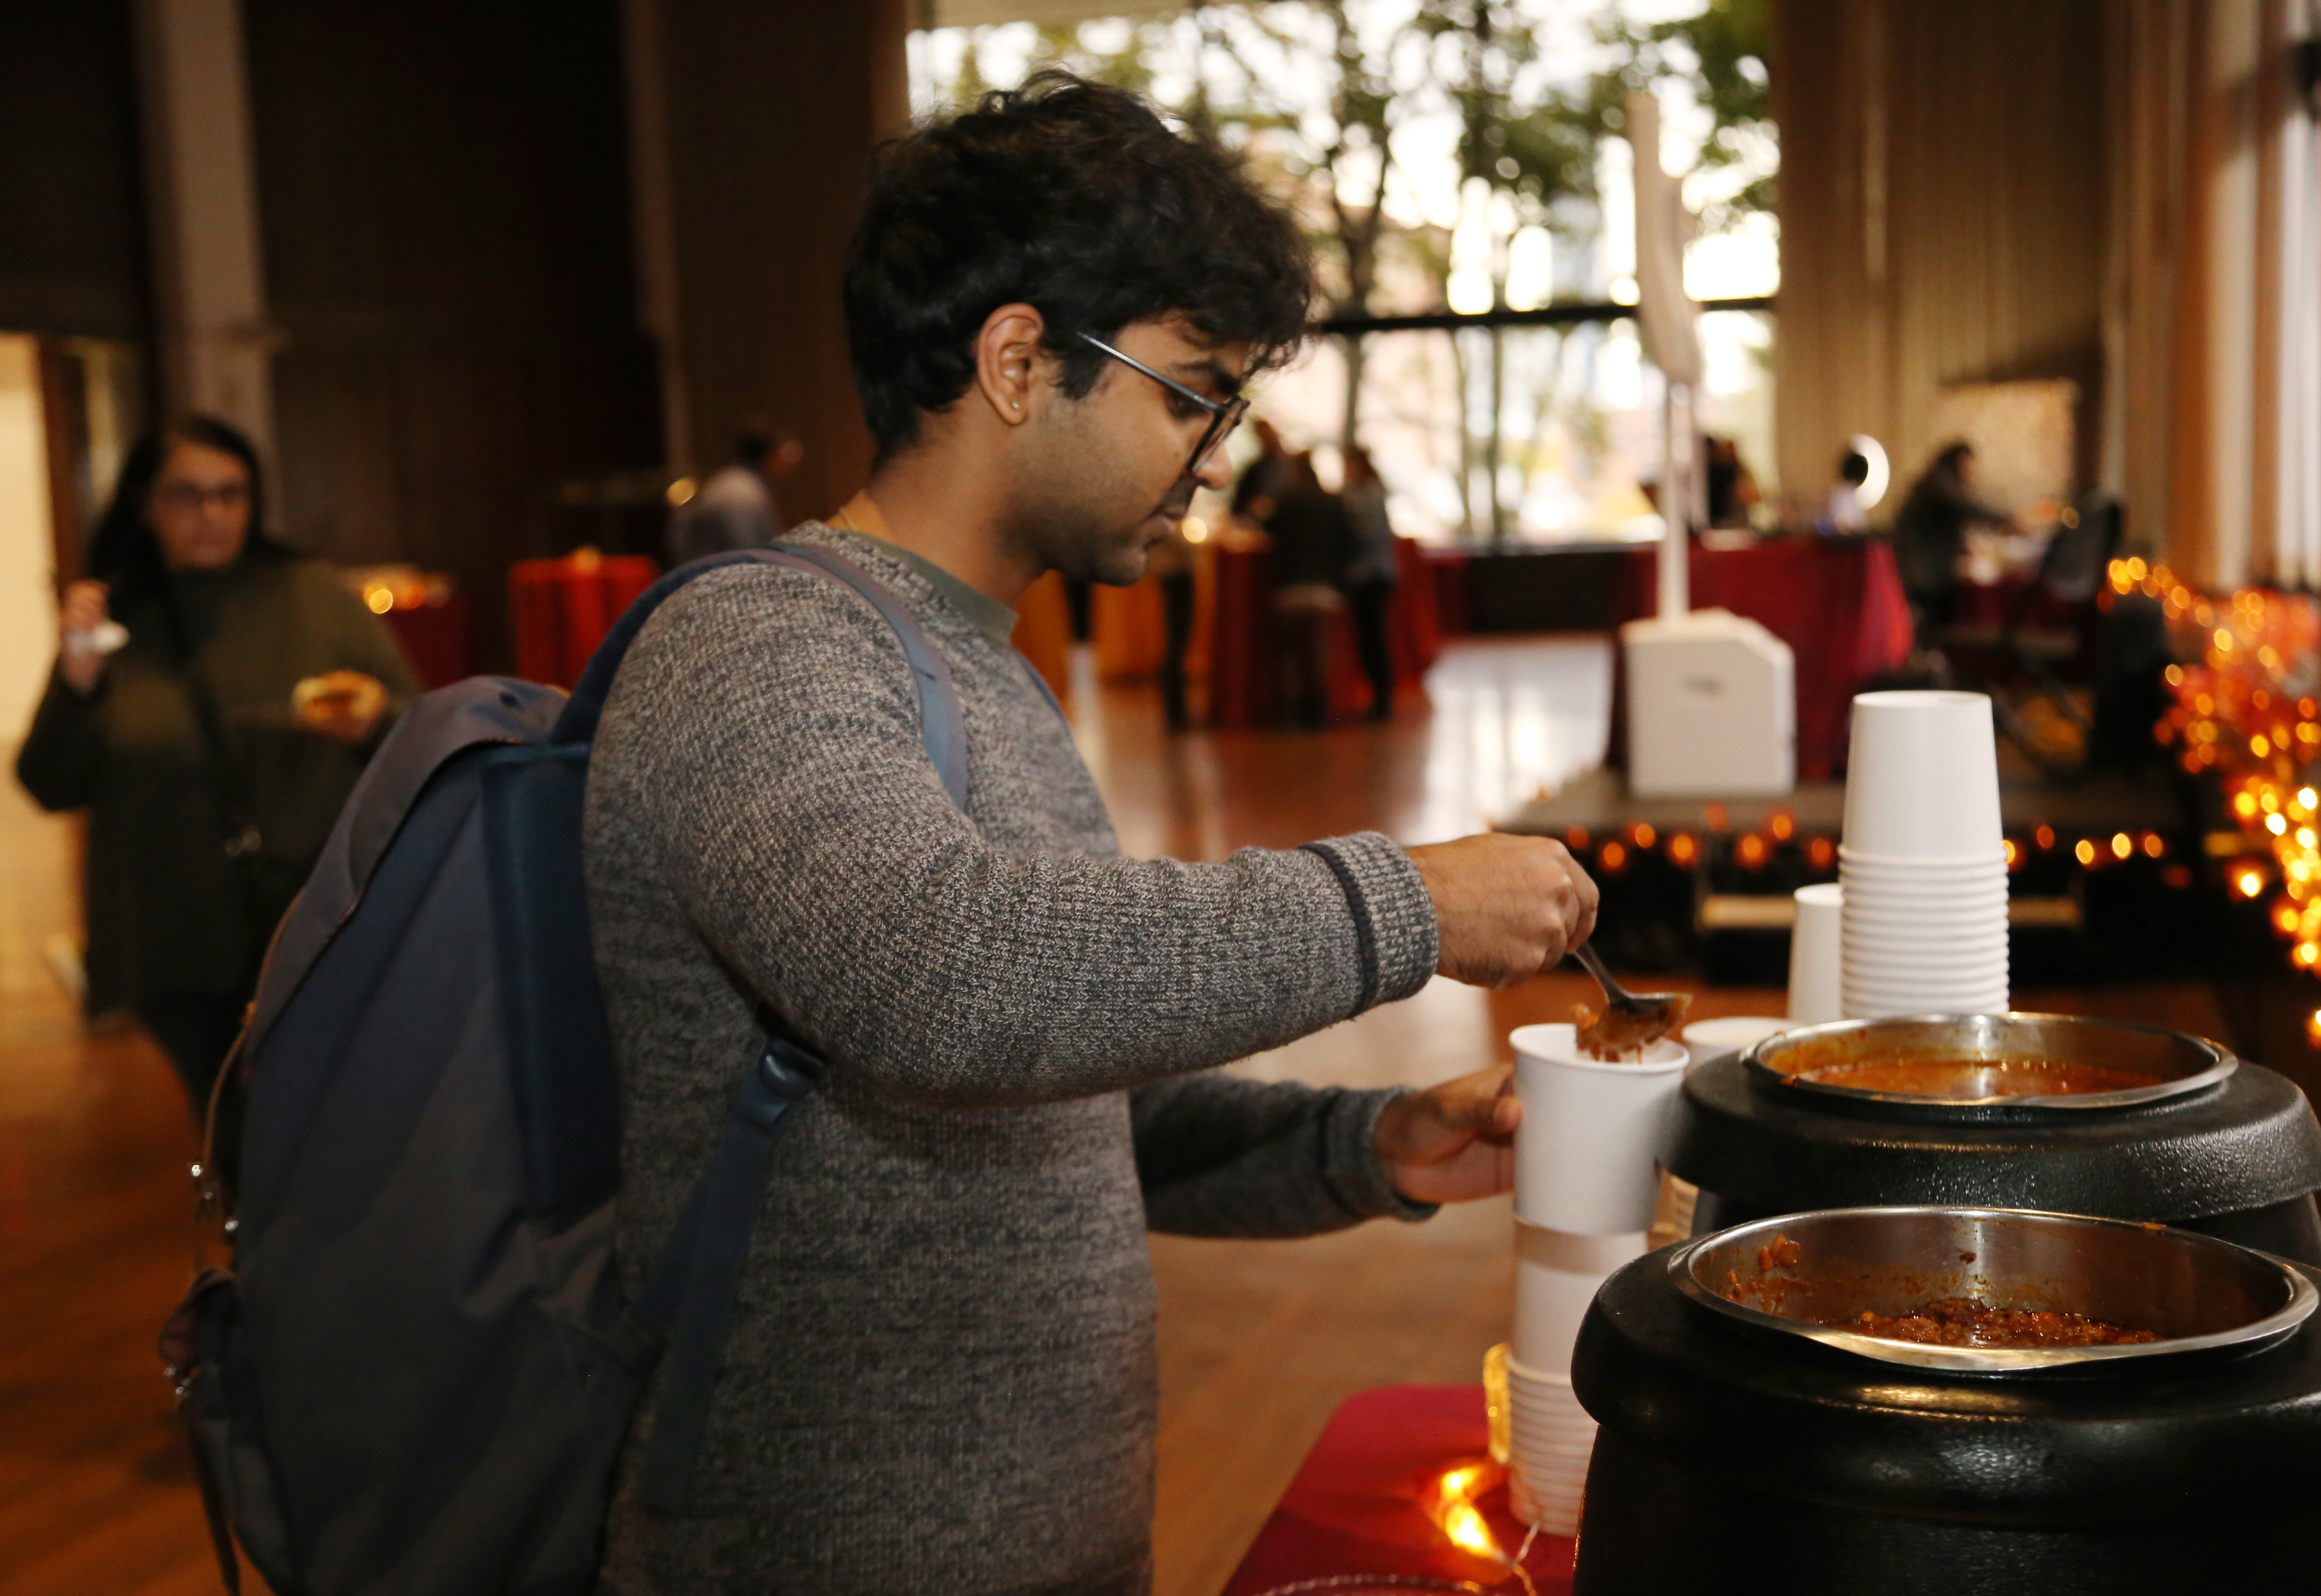 A fall fair attendee in a grey sweater and glasses samples food at a buffet table